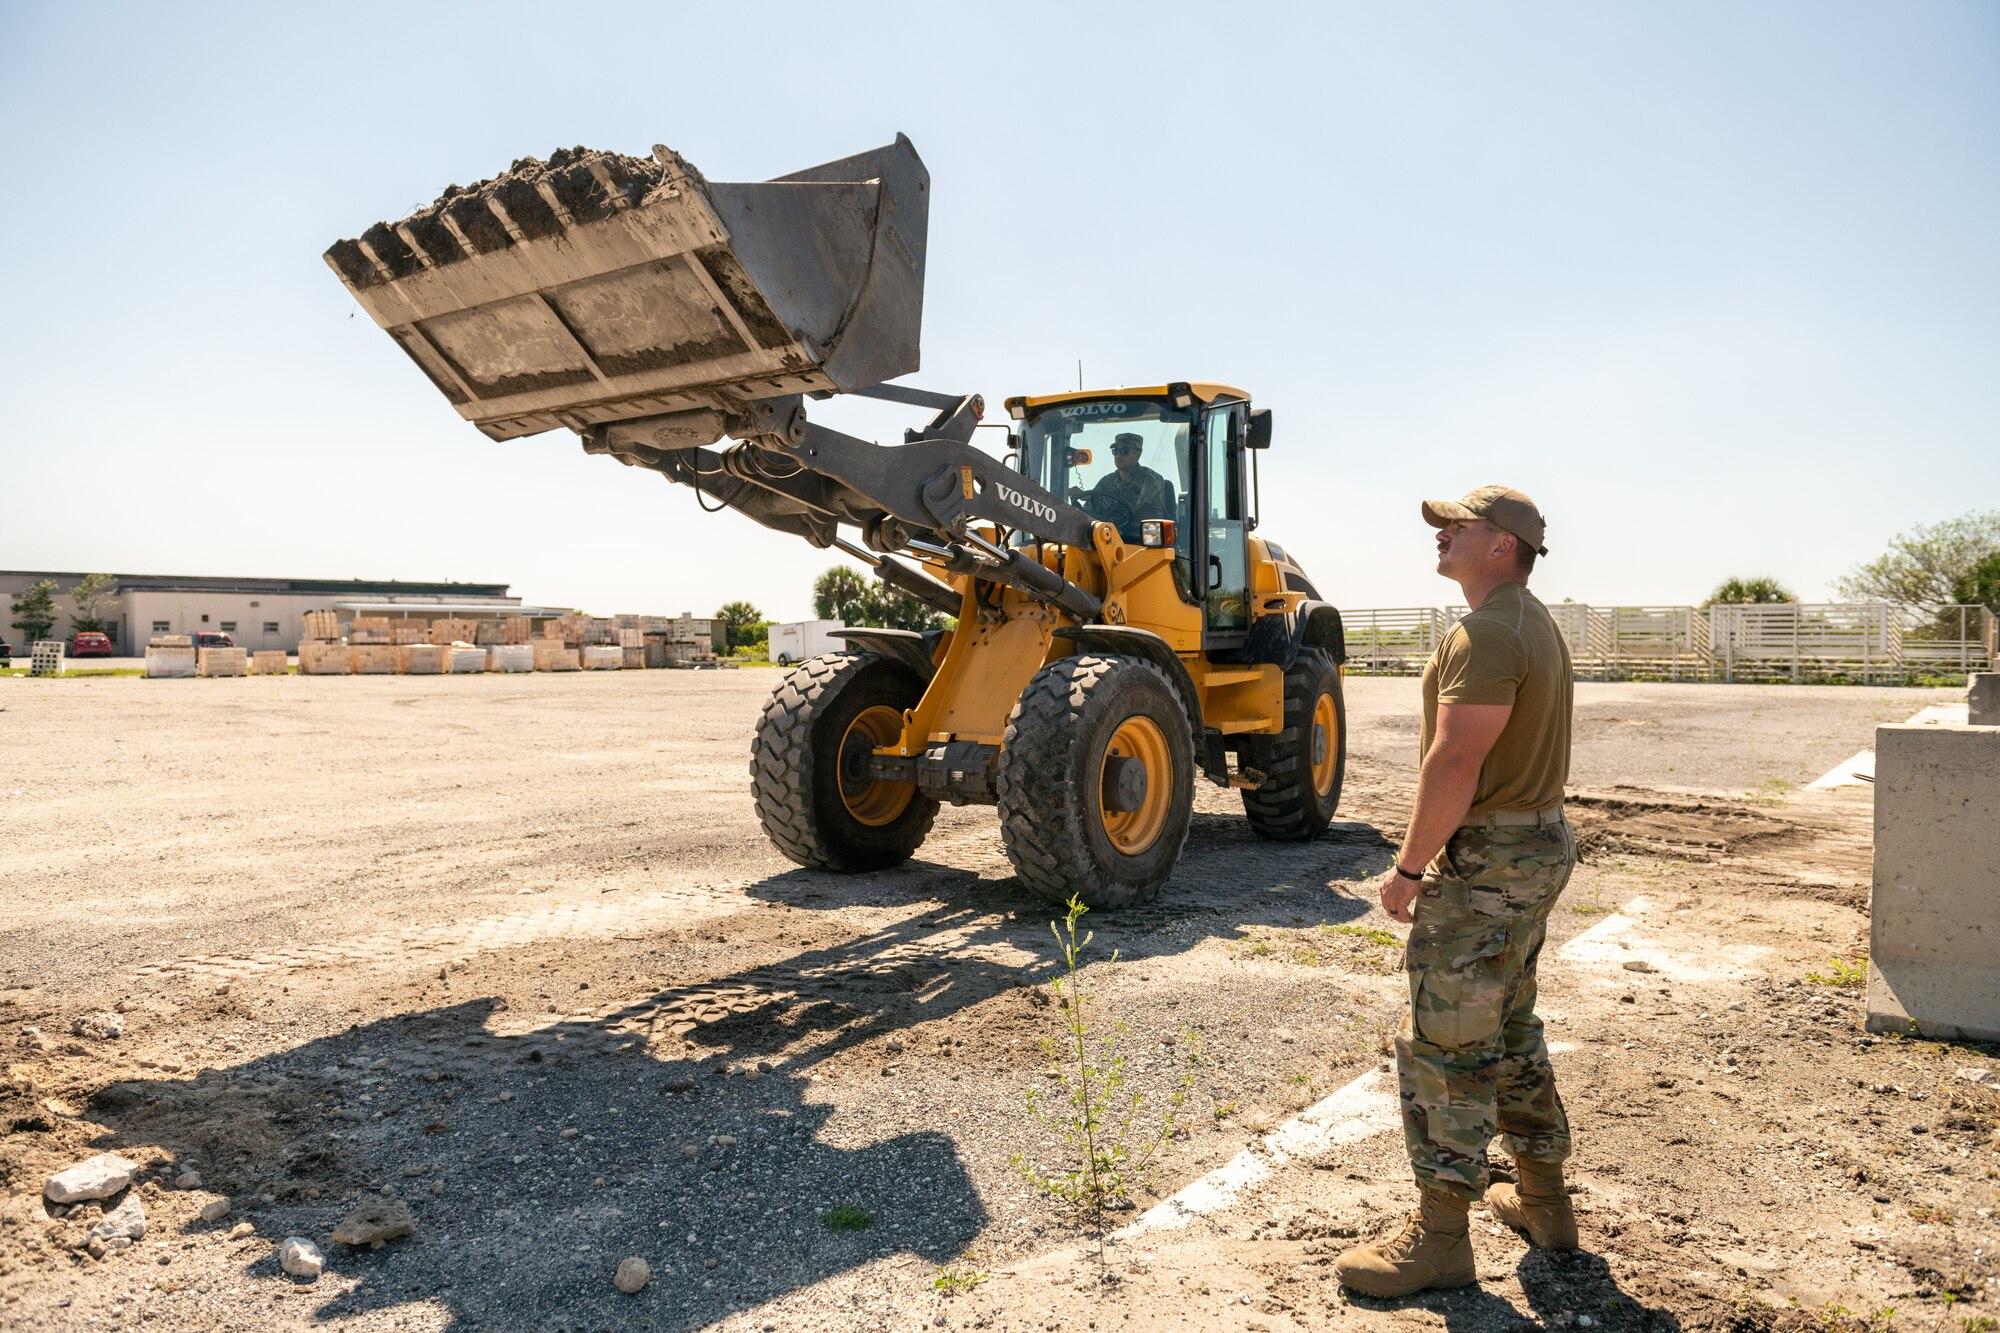 U.S. Air Force Senior Airman Christopher Brown, 45th Civil Engineer Squadron, monitors dirt loading operations during a training session March 17, 2022, at Patrick Space Force Base, Fla. Brown and several CE Airmen are preparing to compete in Readiness Challenge VIII at Tyndall Air Force Base, Fla., April 18-22. The competition will test their abilities to complete tasks associated with the CE career field. (U.S. Space Force photo by Josh Conti)